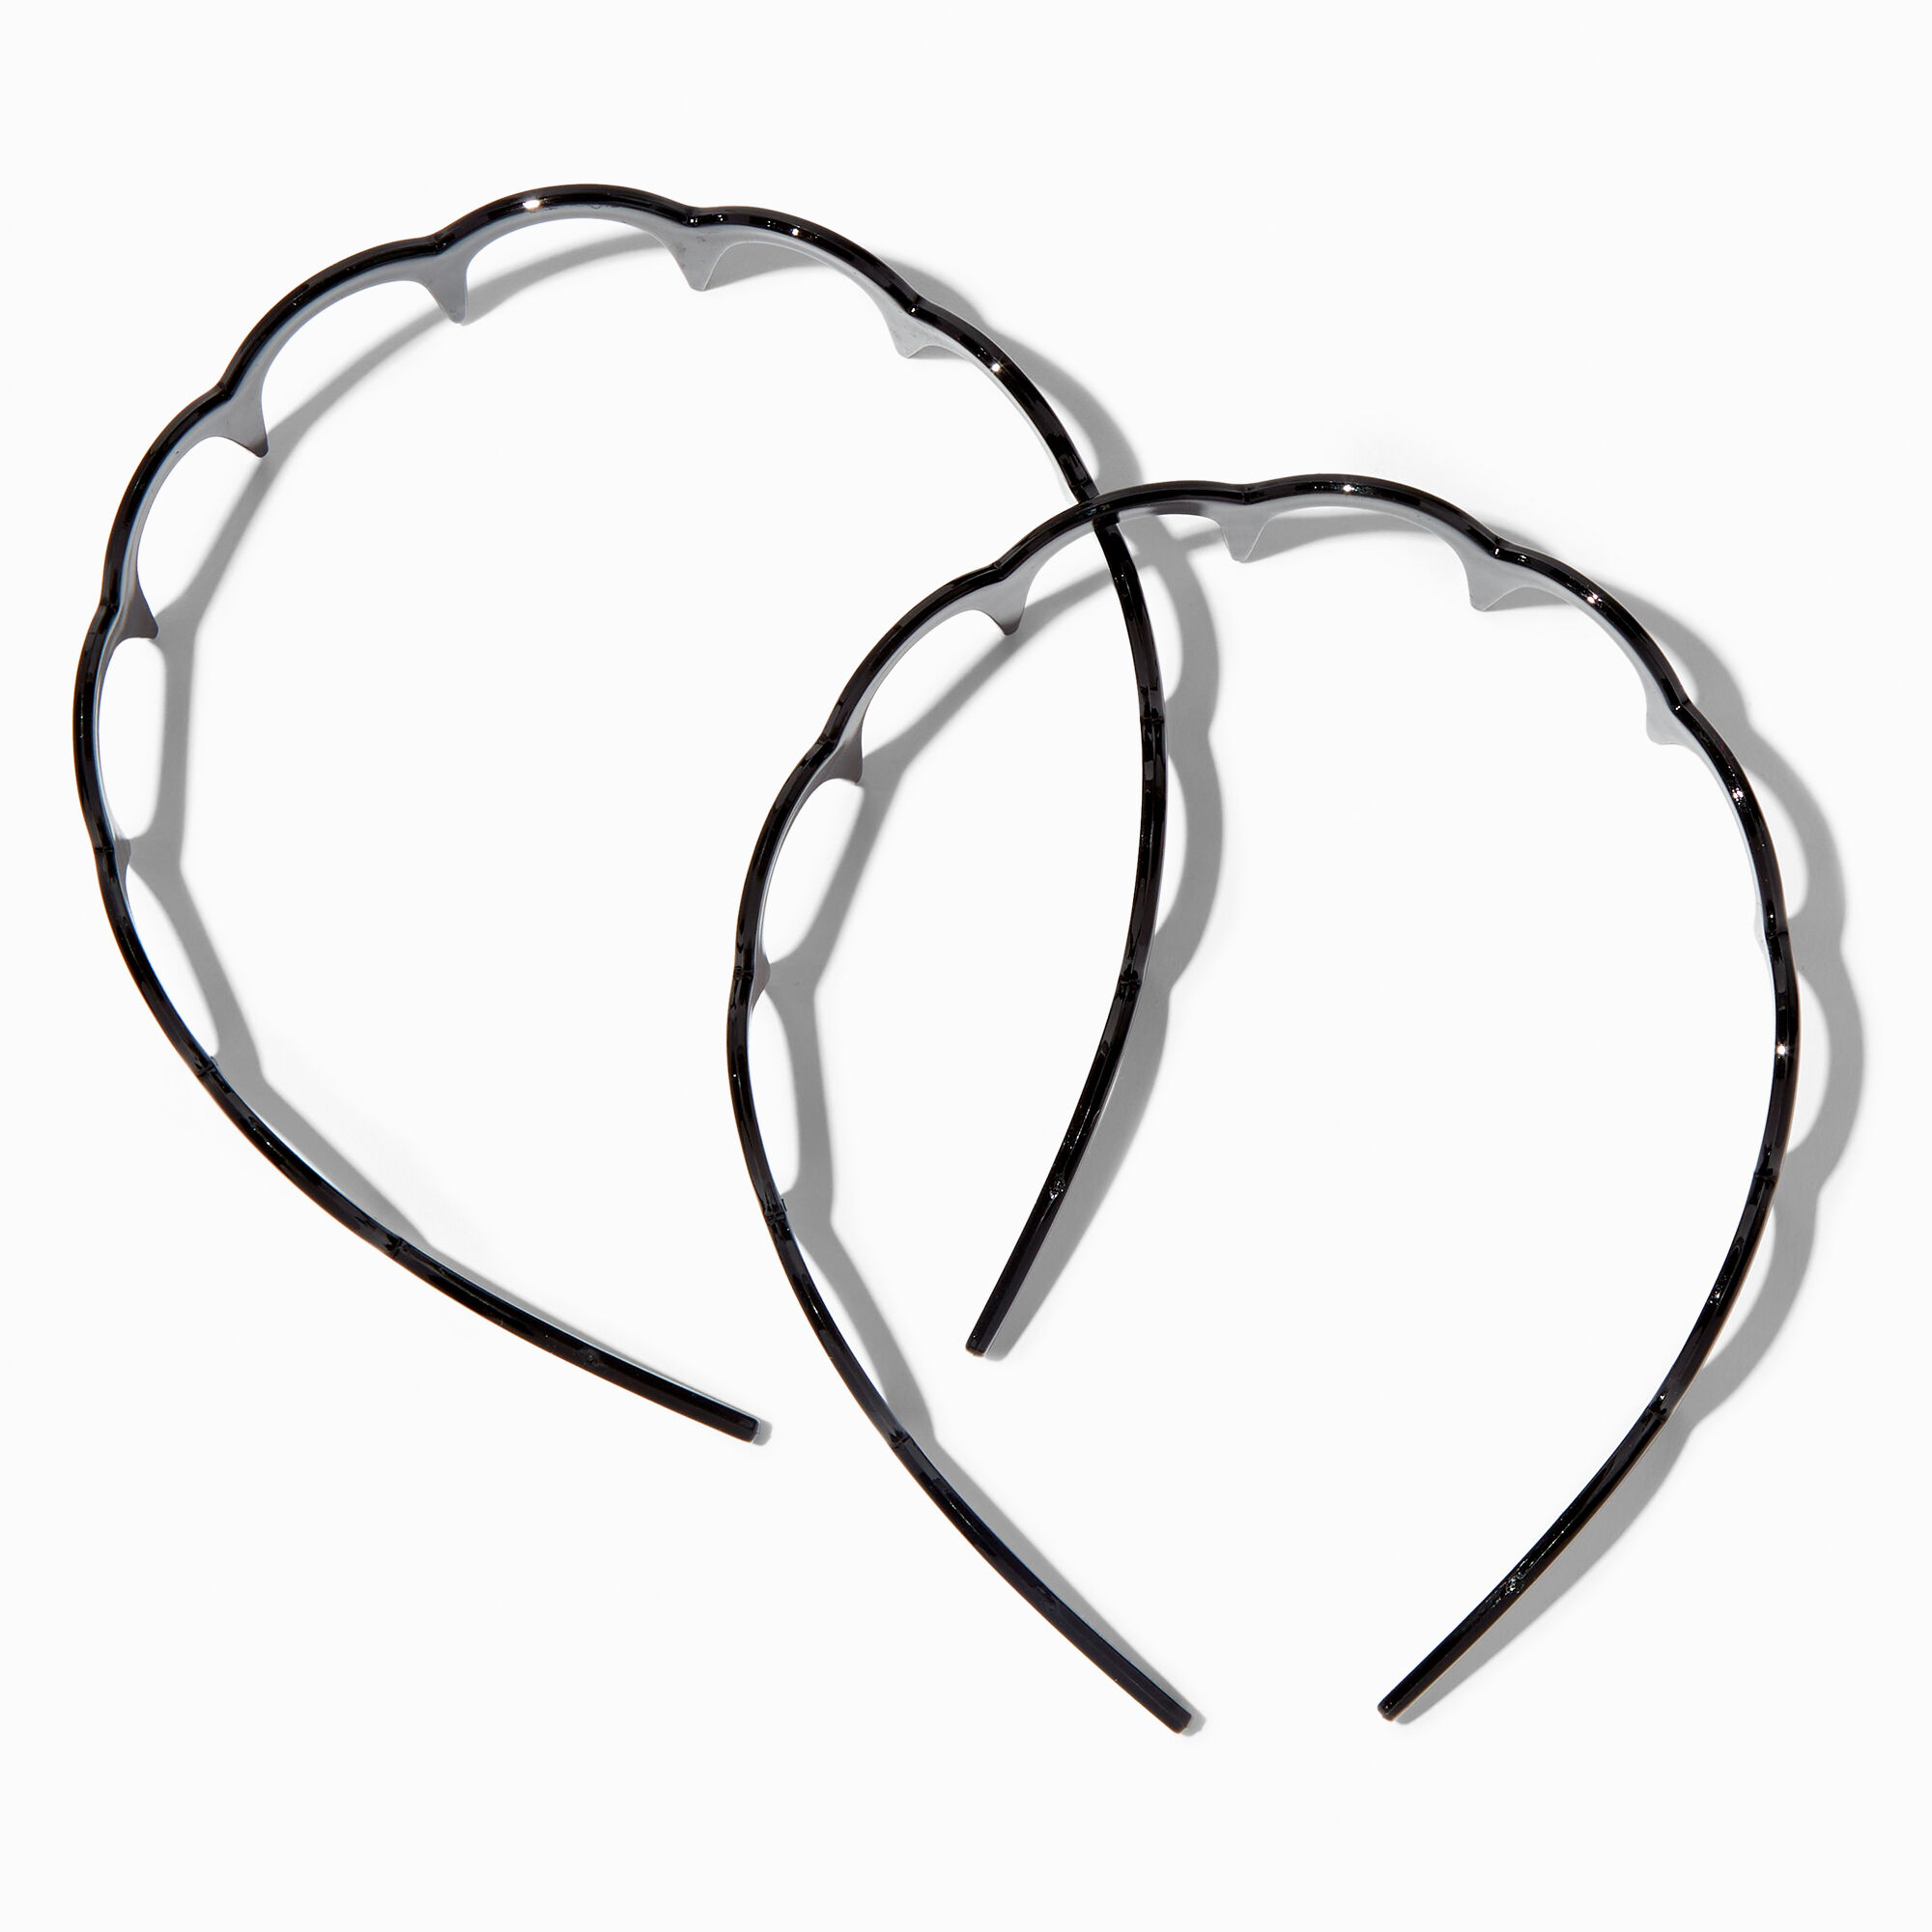 View Claires Classic Scalloped Headbands 2 Pack Black information